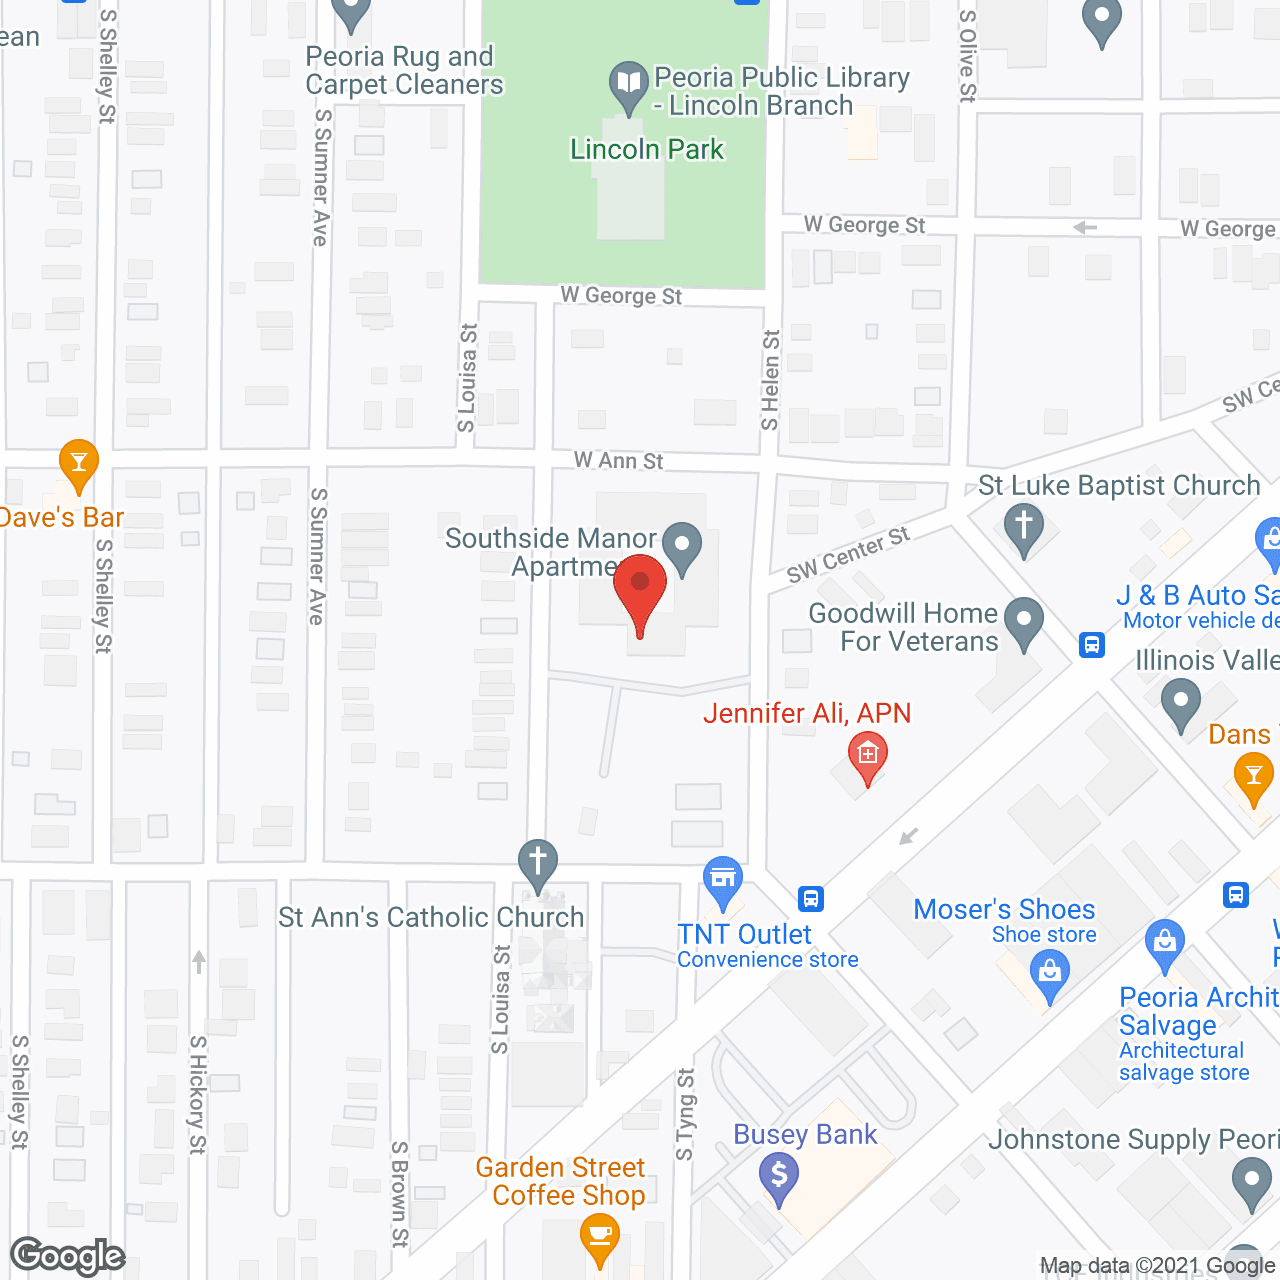 Southside Manor Apartments in google map